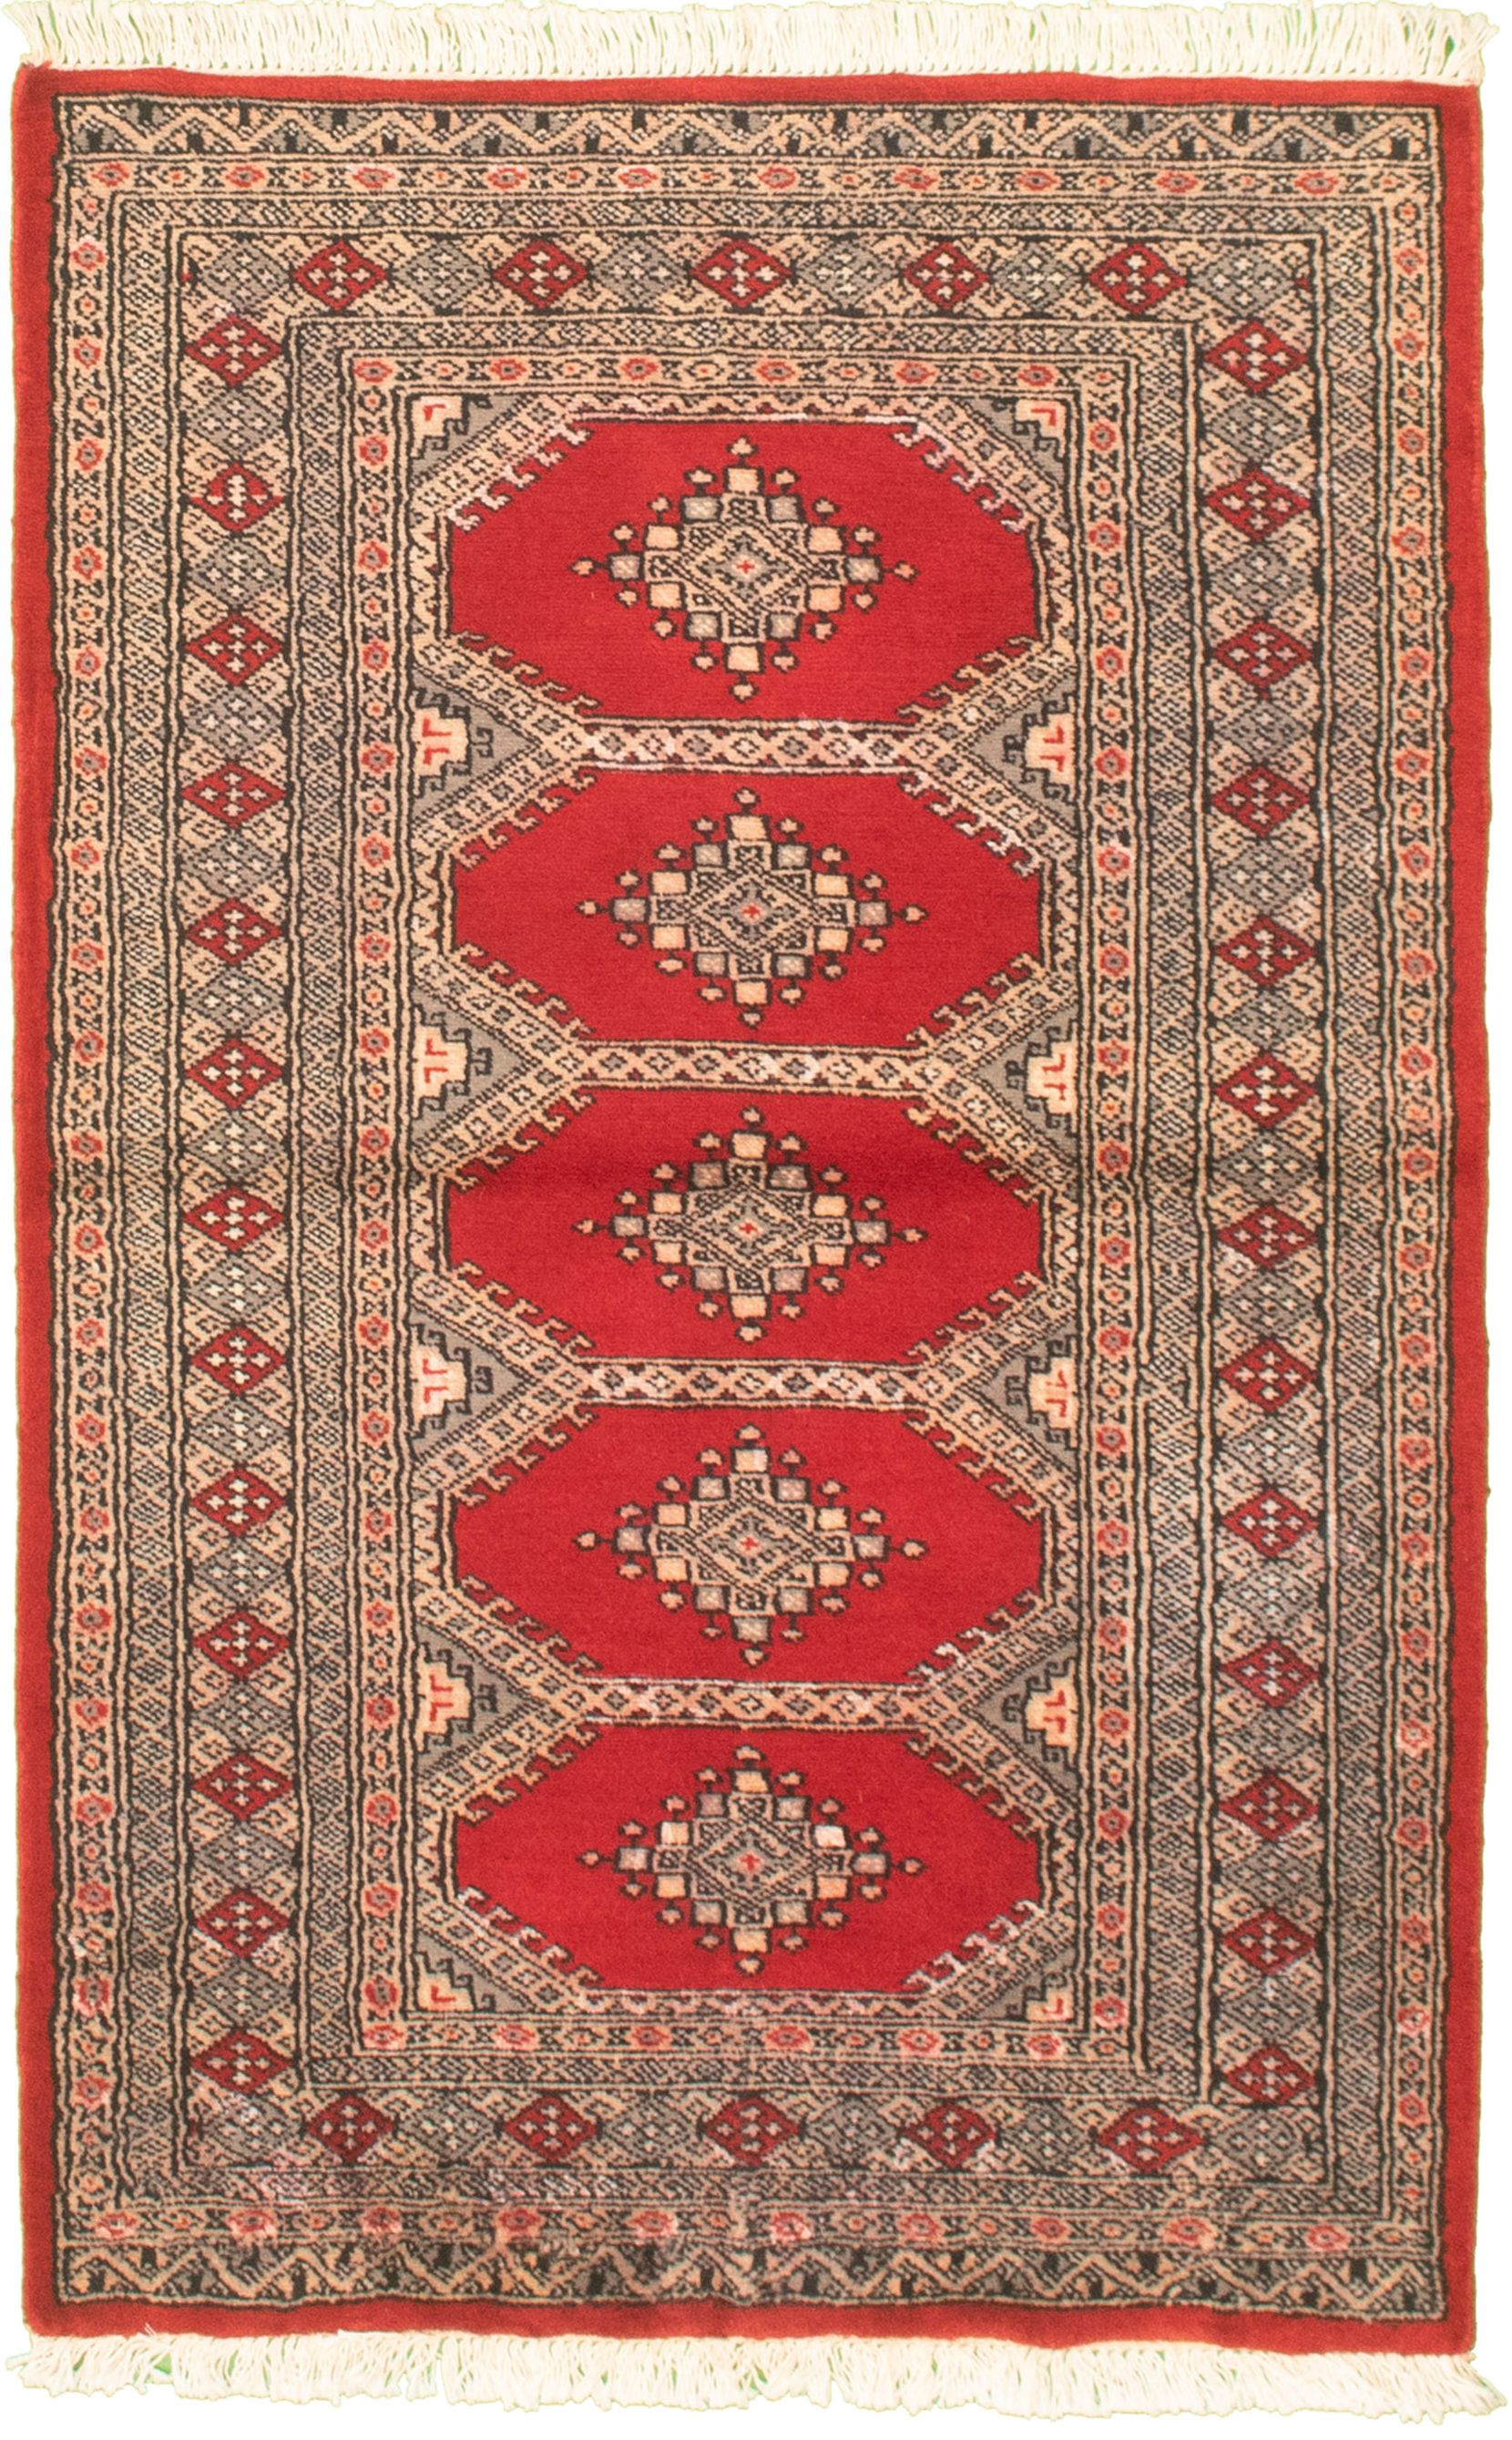 Hand-knotted Finest Peshawar Bokhara Red Wool Rug 3'1" x 4'11"  Size: 3'1" x 4'11"  